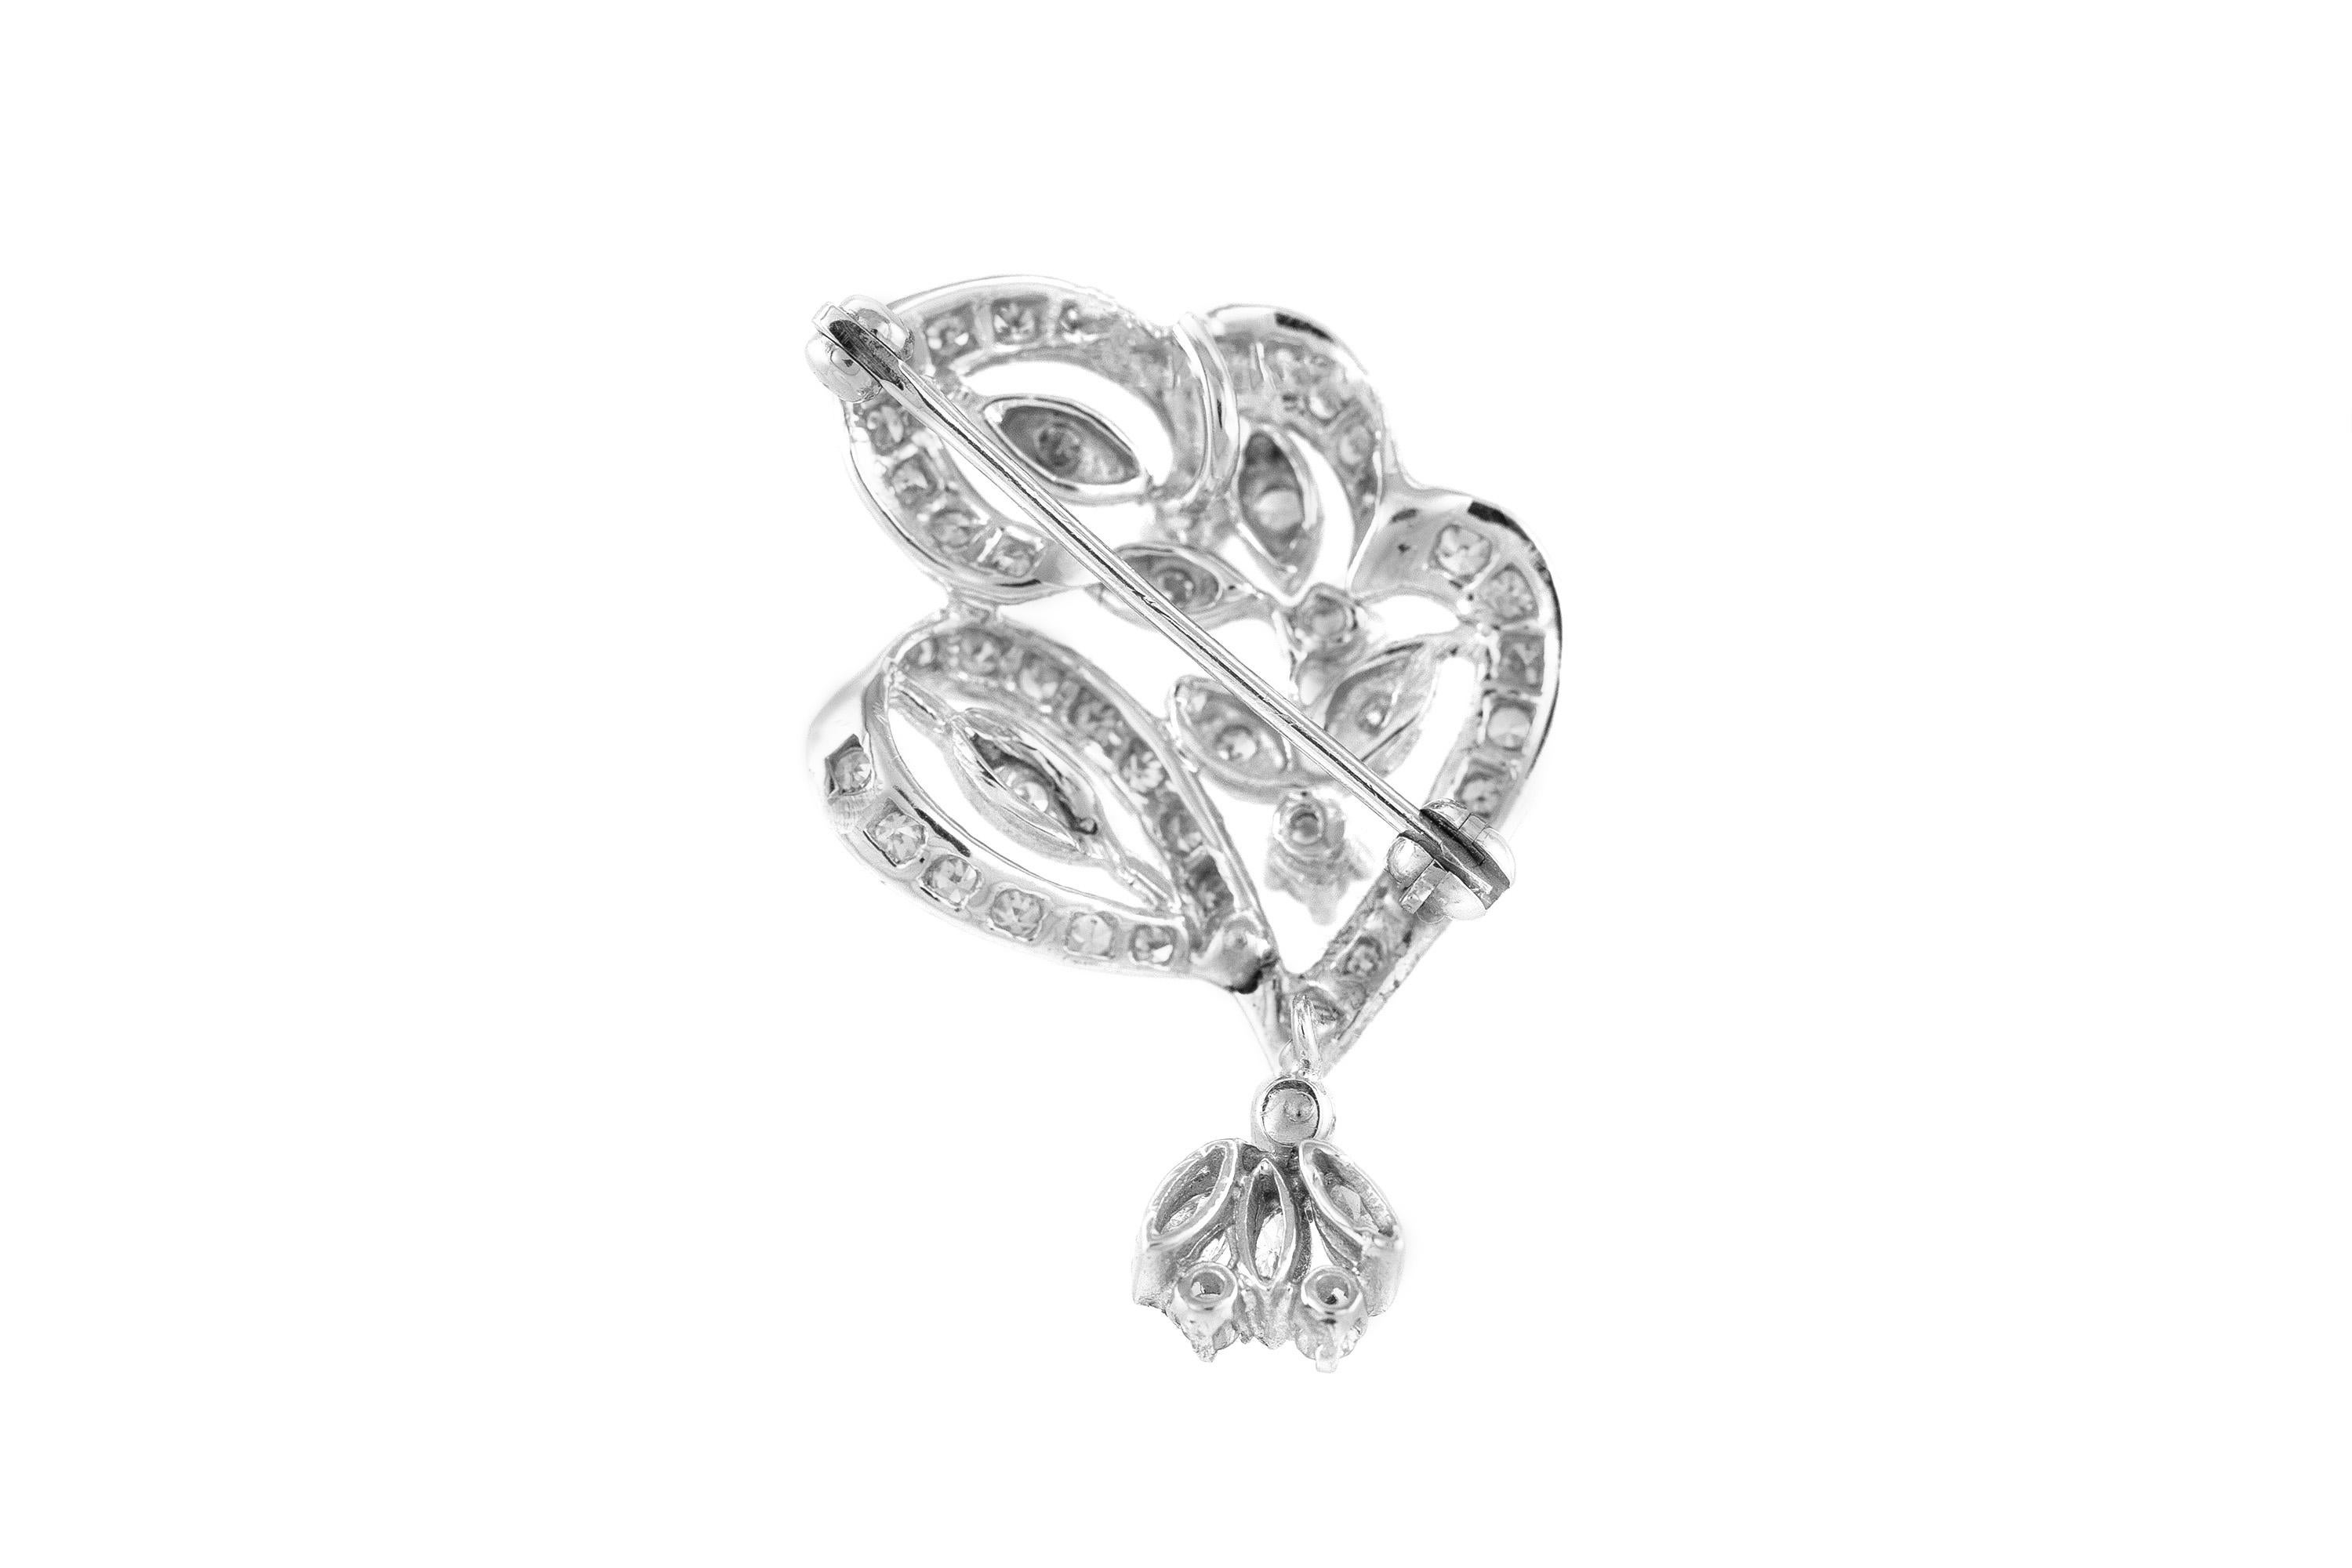 Pendant and a pin finely crafted in 14k white gold, with diamonds weighing a total of 1.30 dwt. Circa 1940.